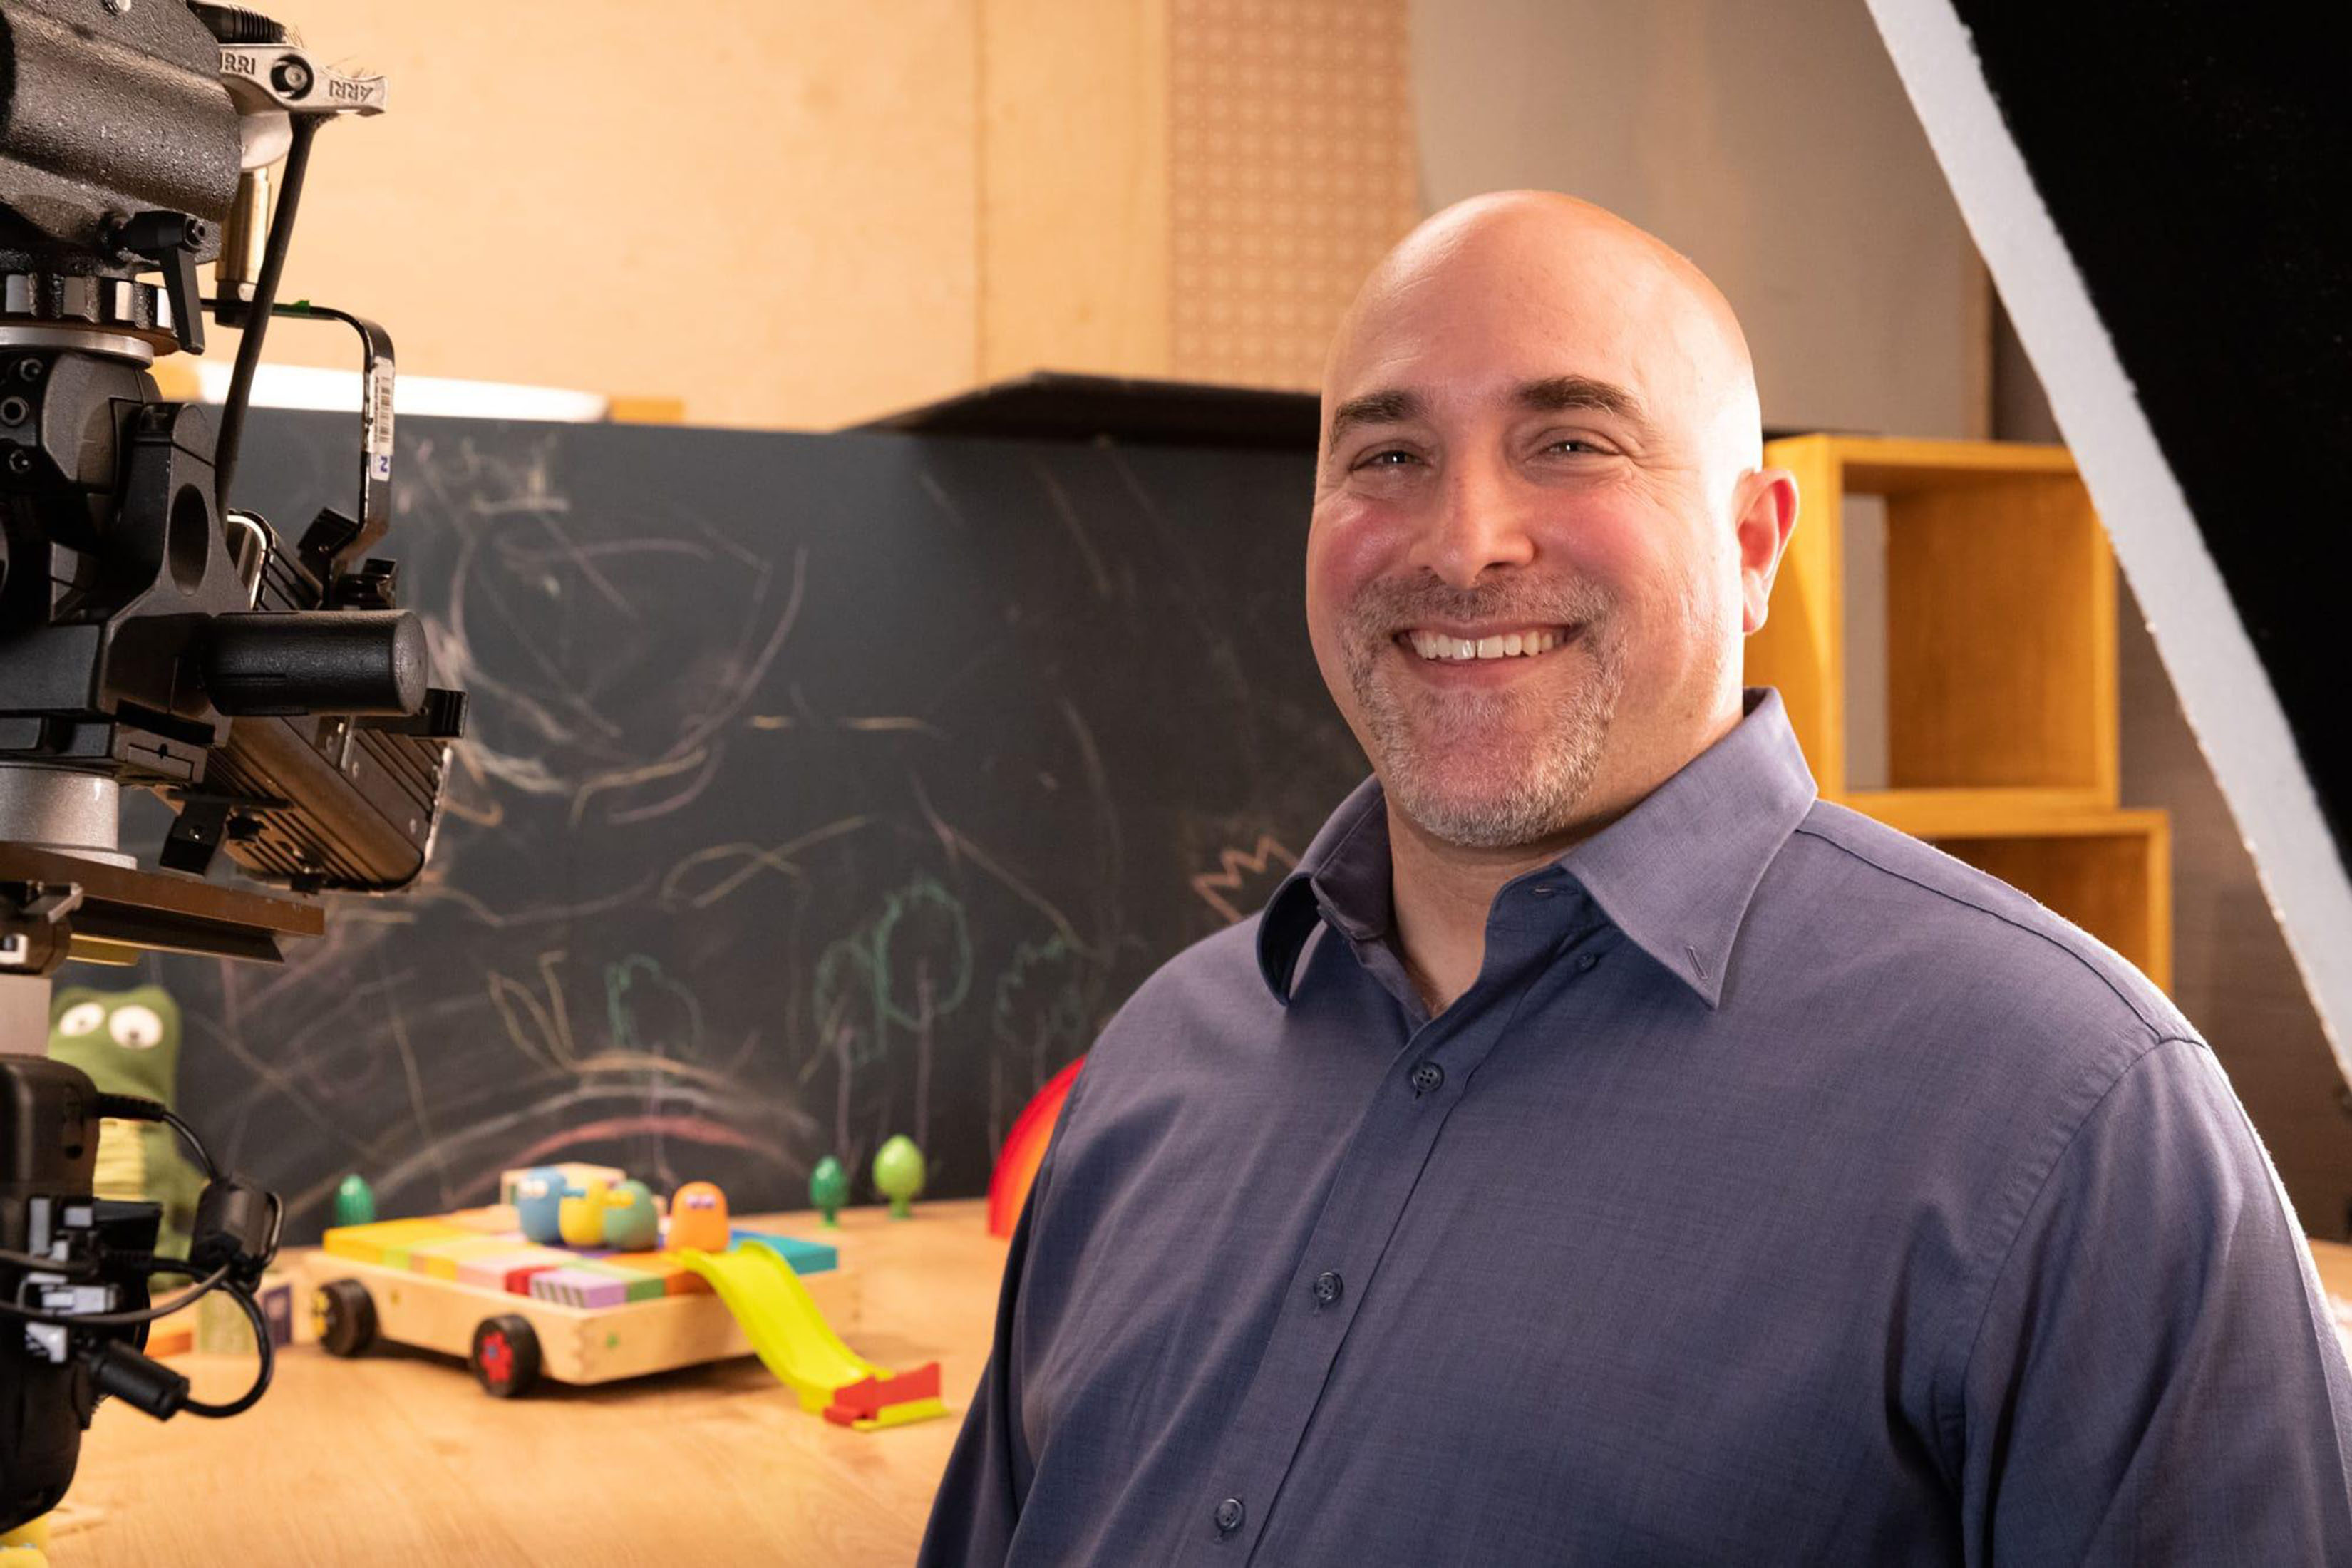 Steven Shapiro is shown beside a table with toys and a blackboard. A movie camera is visible at left.